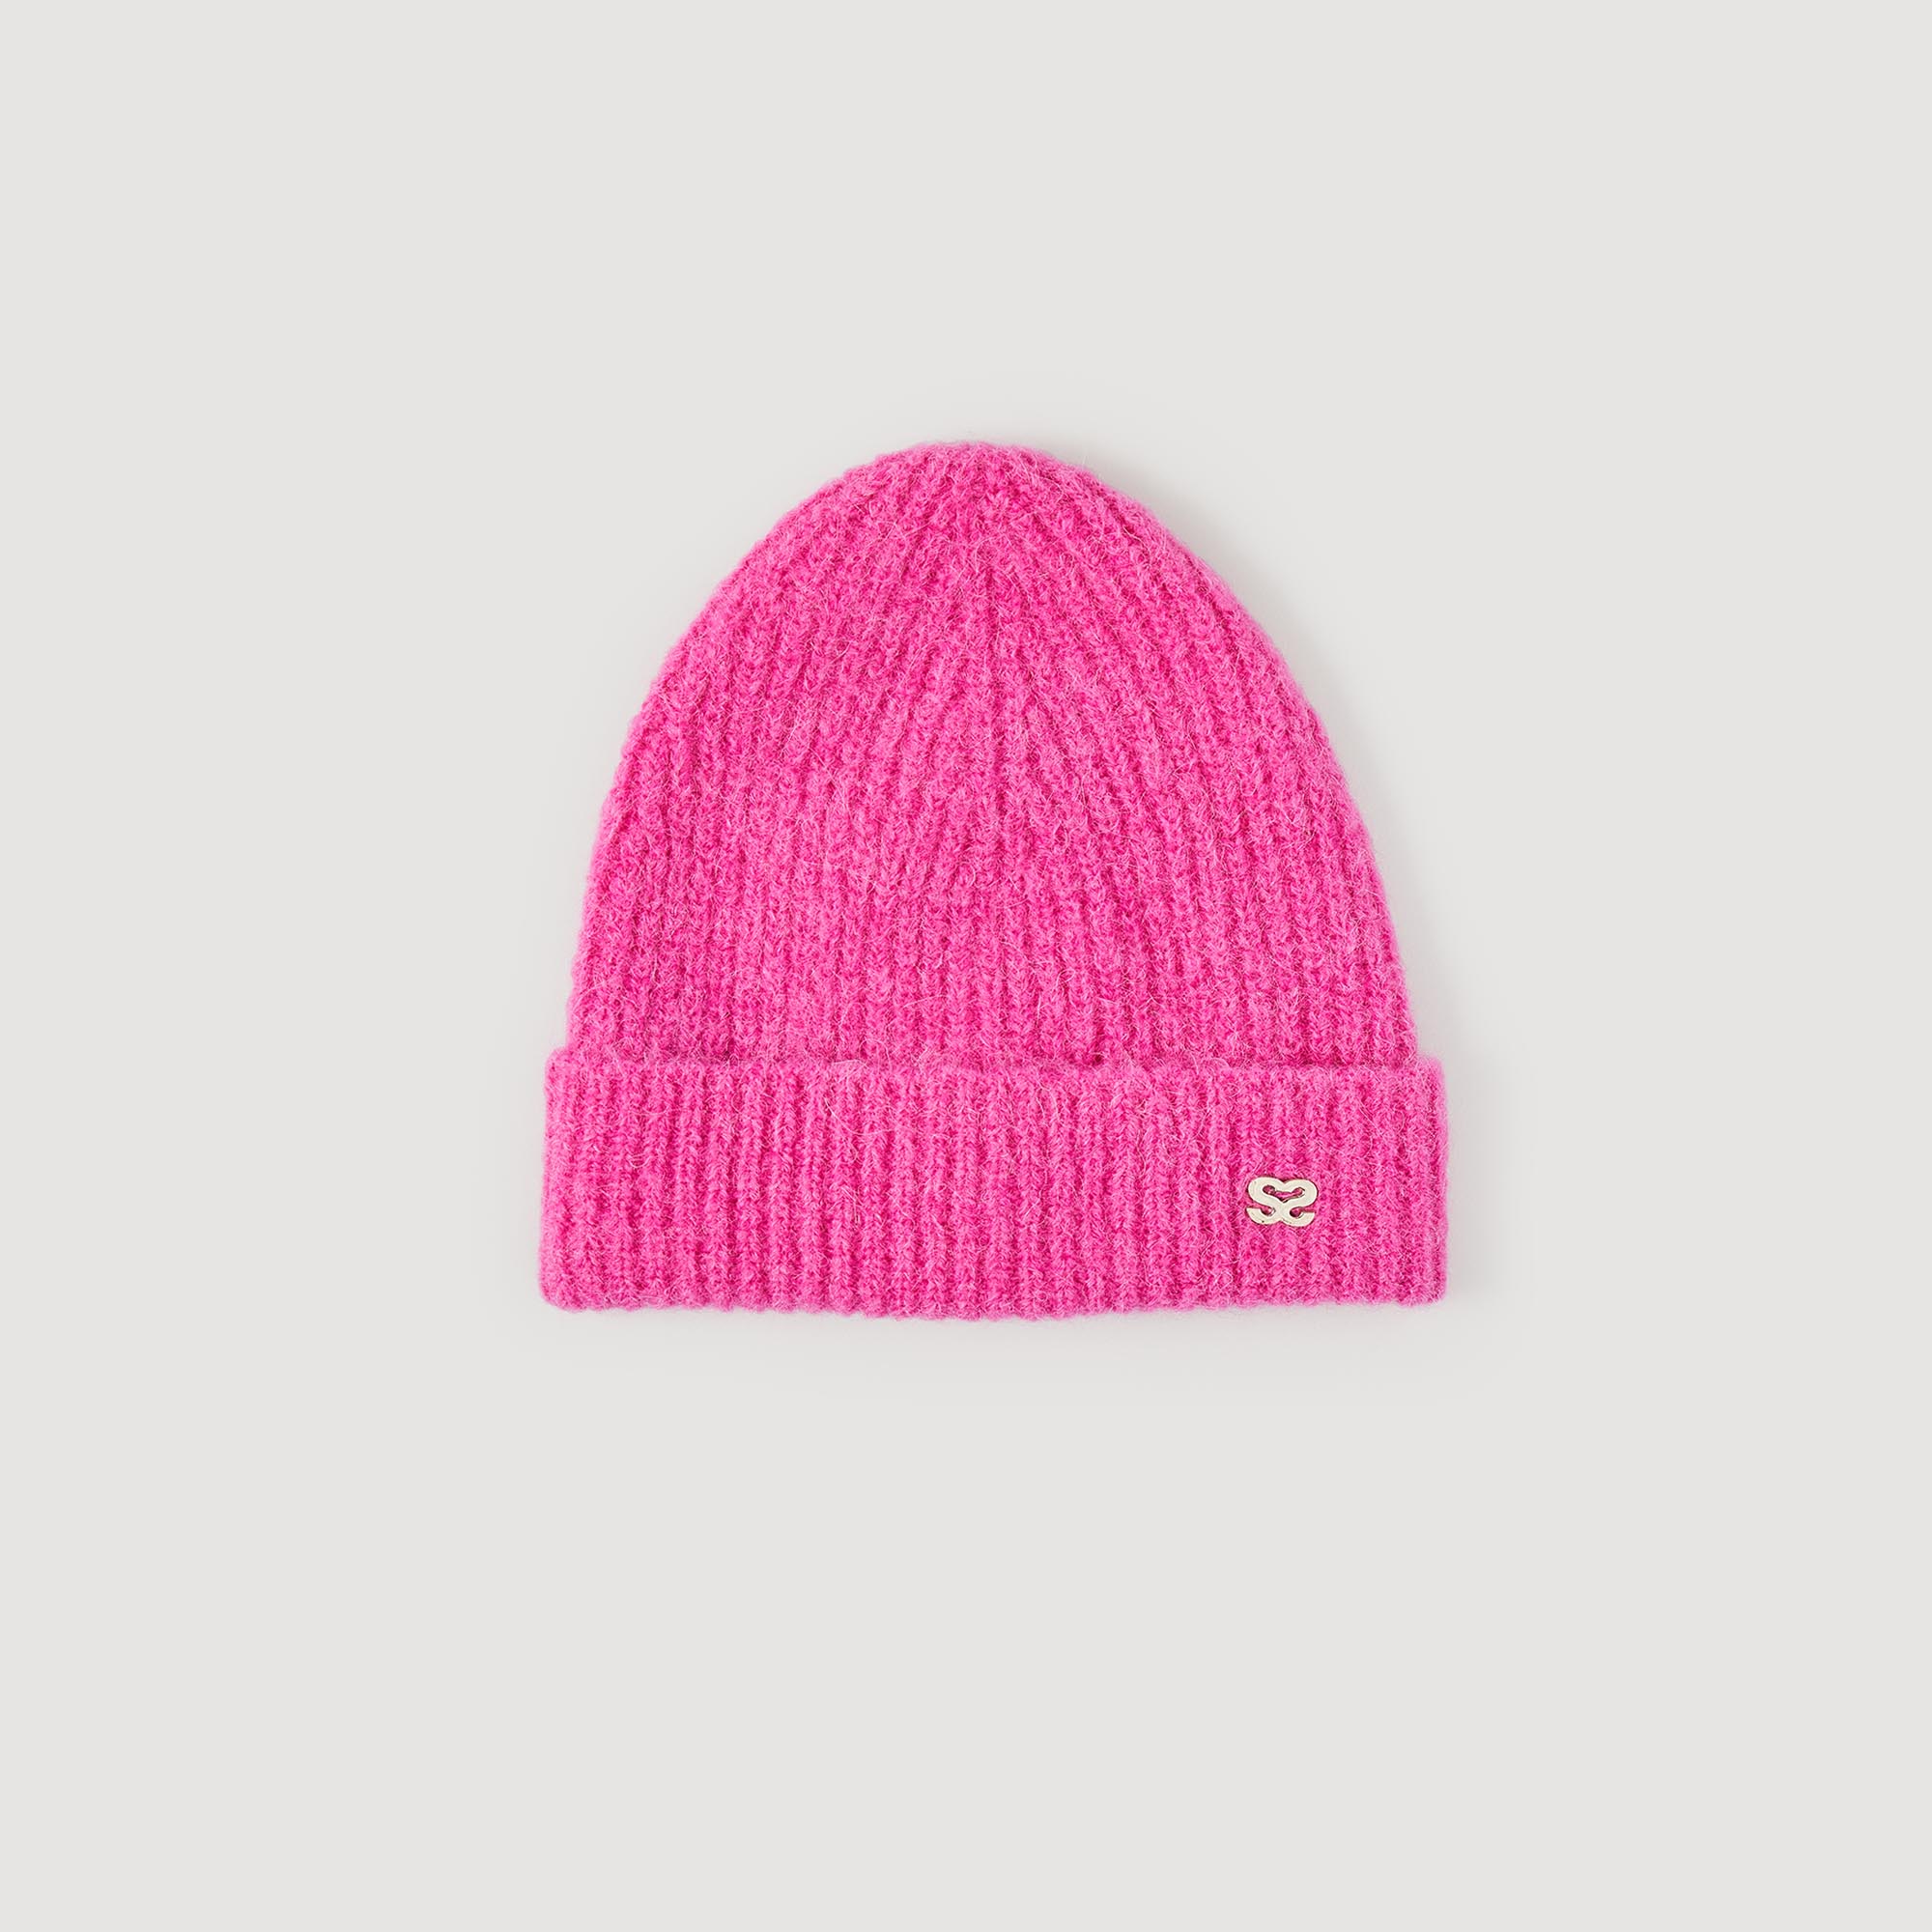 Sandro polyamide Rib knit hat embellished with an S on the turn-up